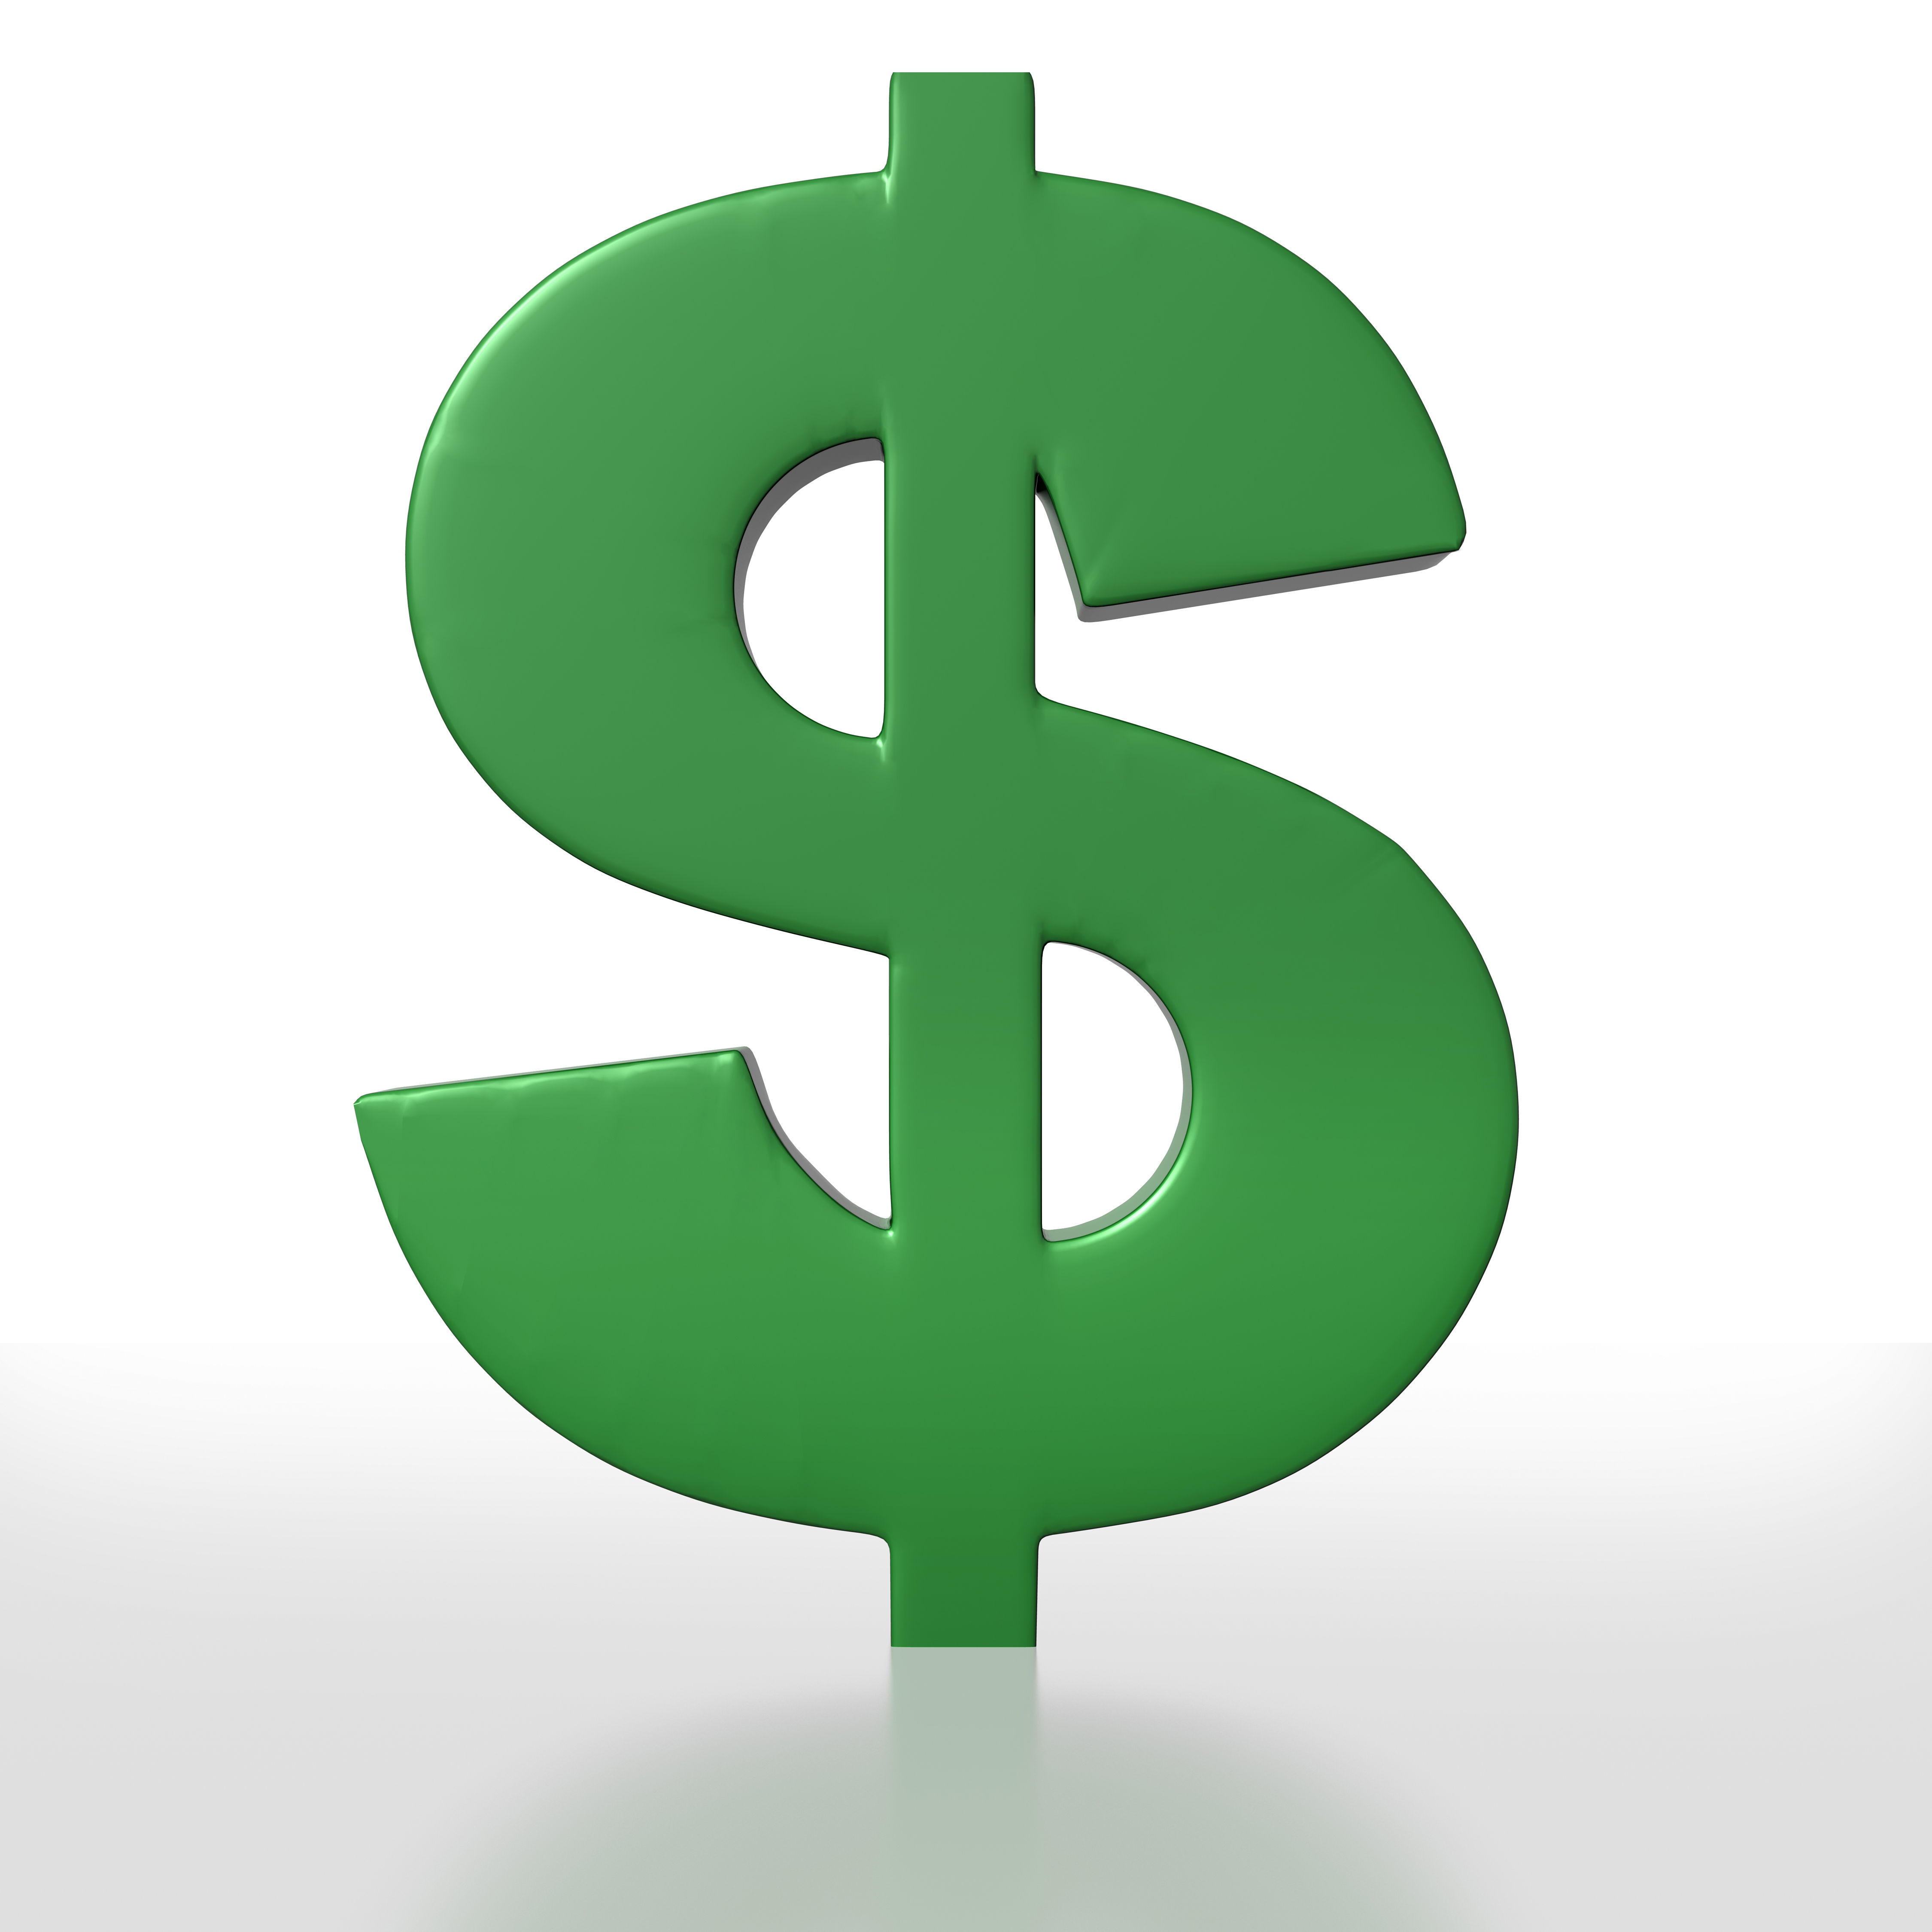 Free Dollar Sign Image, Download Free Clip Art, Free Clip